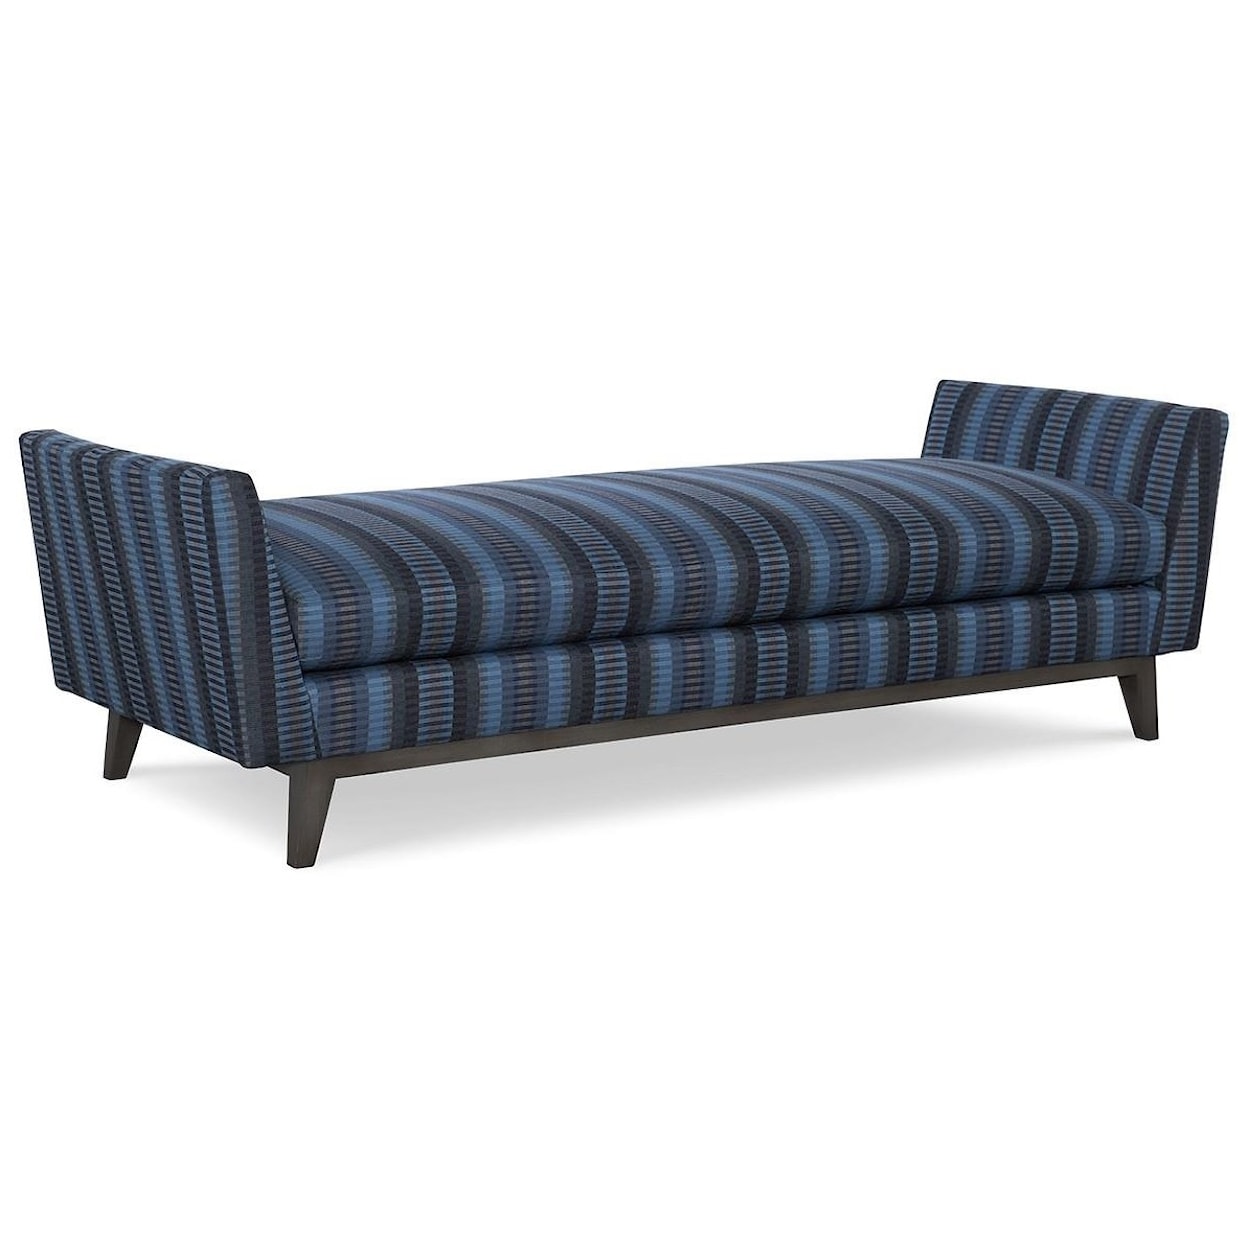 C.R. Laine Daybeds Leif Daybed